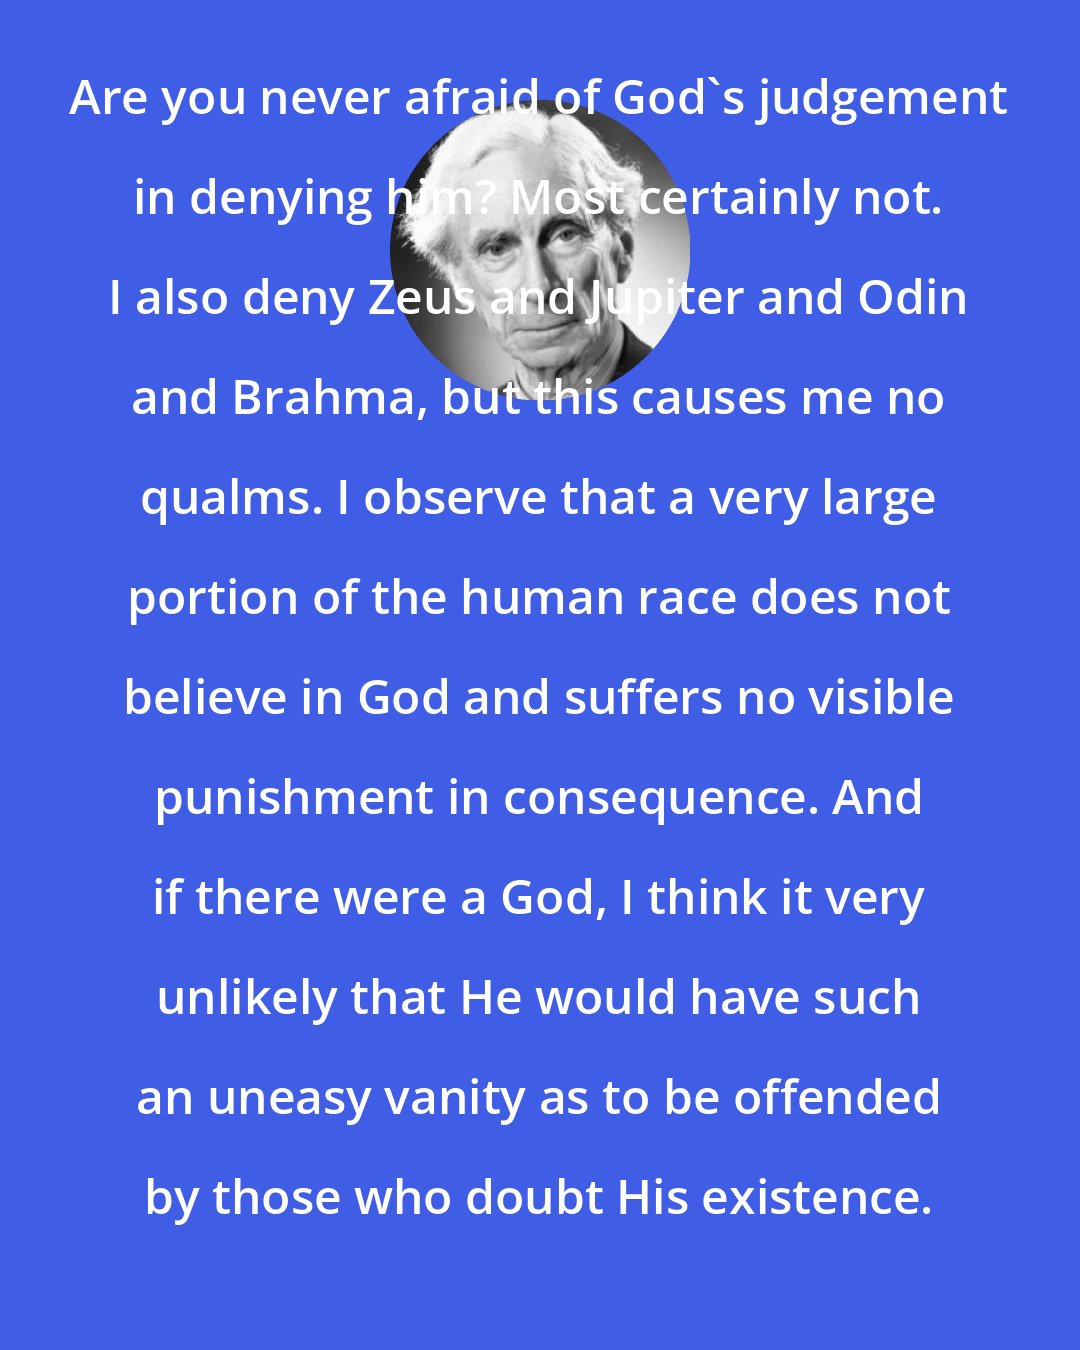 Bertrand Russell: Are you never afraid of God's judgement in denying him? Most certainly not. I also deny Zeus and Jupiter and Odin and Brahma, but this causes me no qualms. I observe that a very large portion of the human race does not believe in God and suffers no visible punishment in consequence. And if there were a God, I think it very unlikely that He would have such an uneasy vanity as to be offended by those who doubt His existence.